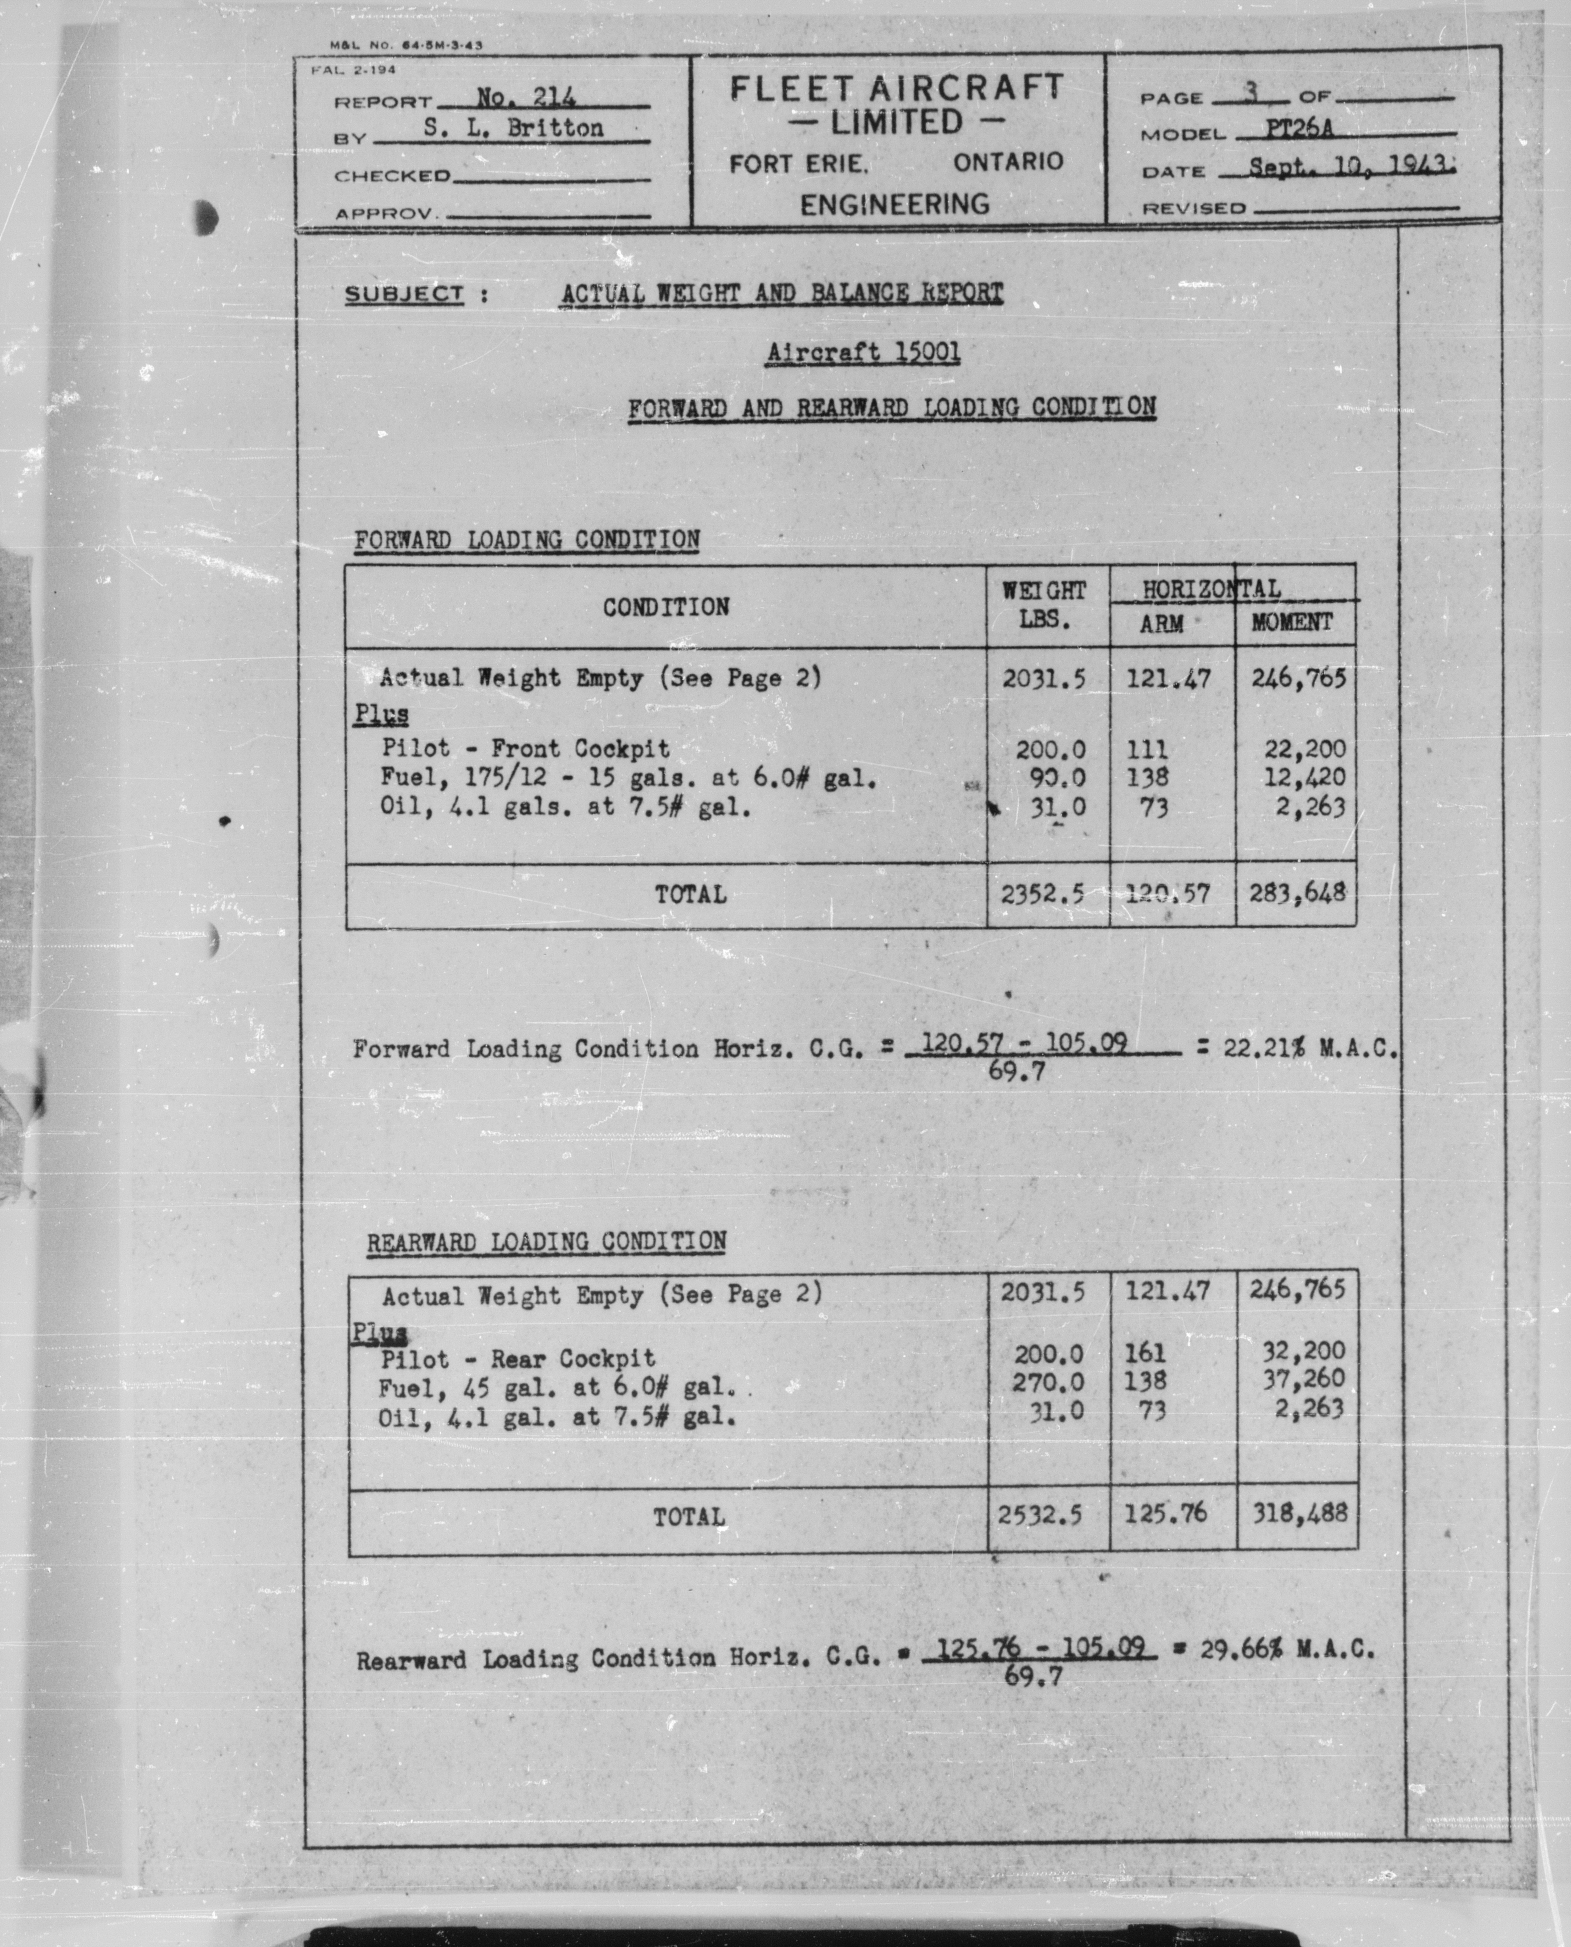 Sample page 6 from AirCorps Library document: Actual Weight and Balance Report for Model PT-26A